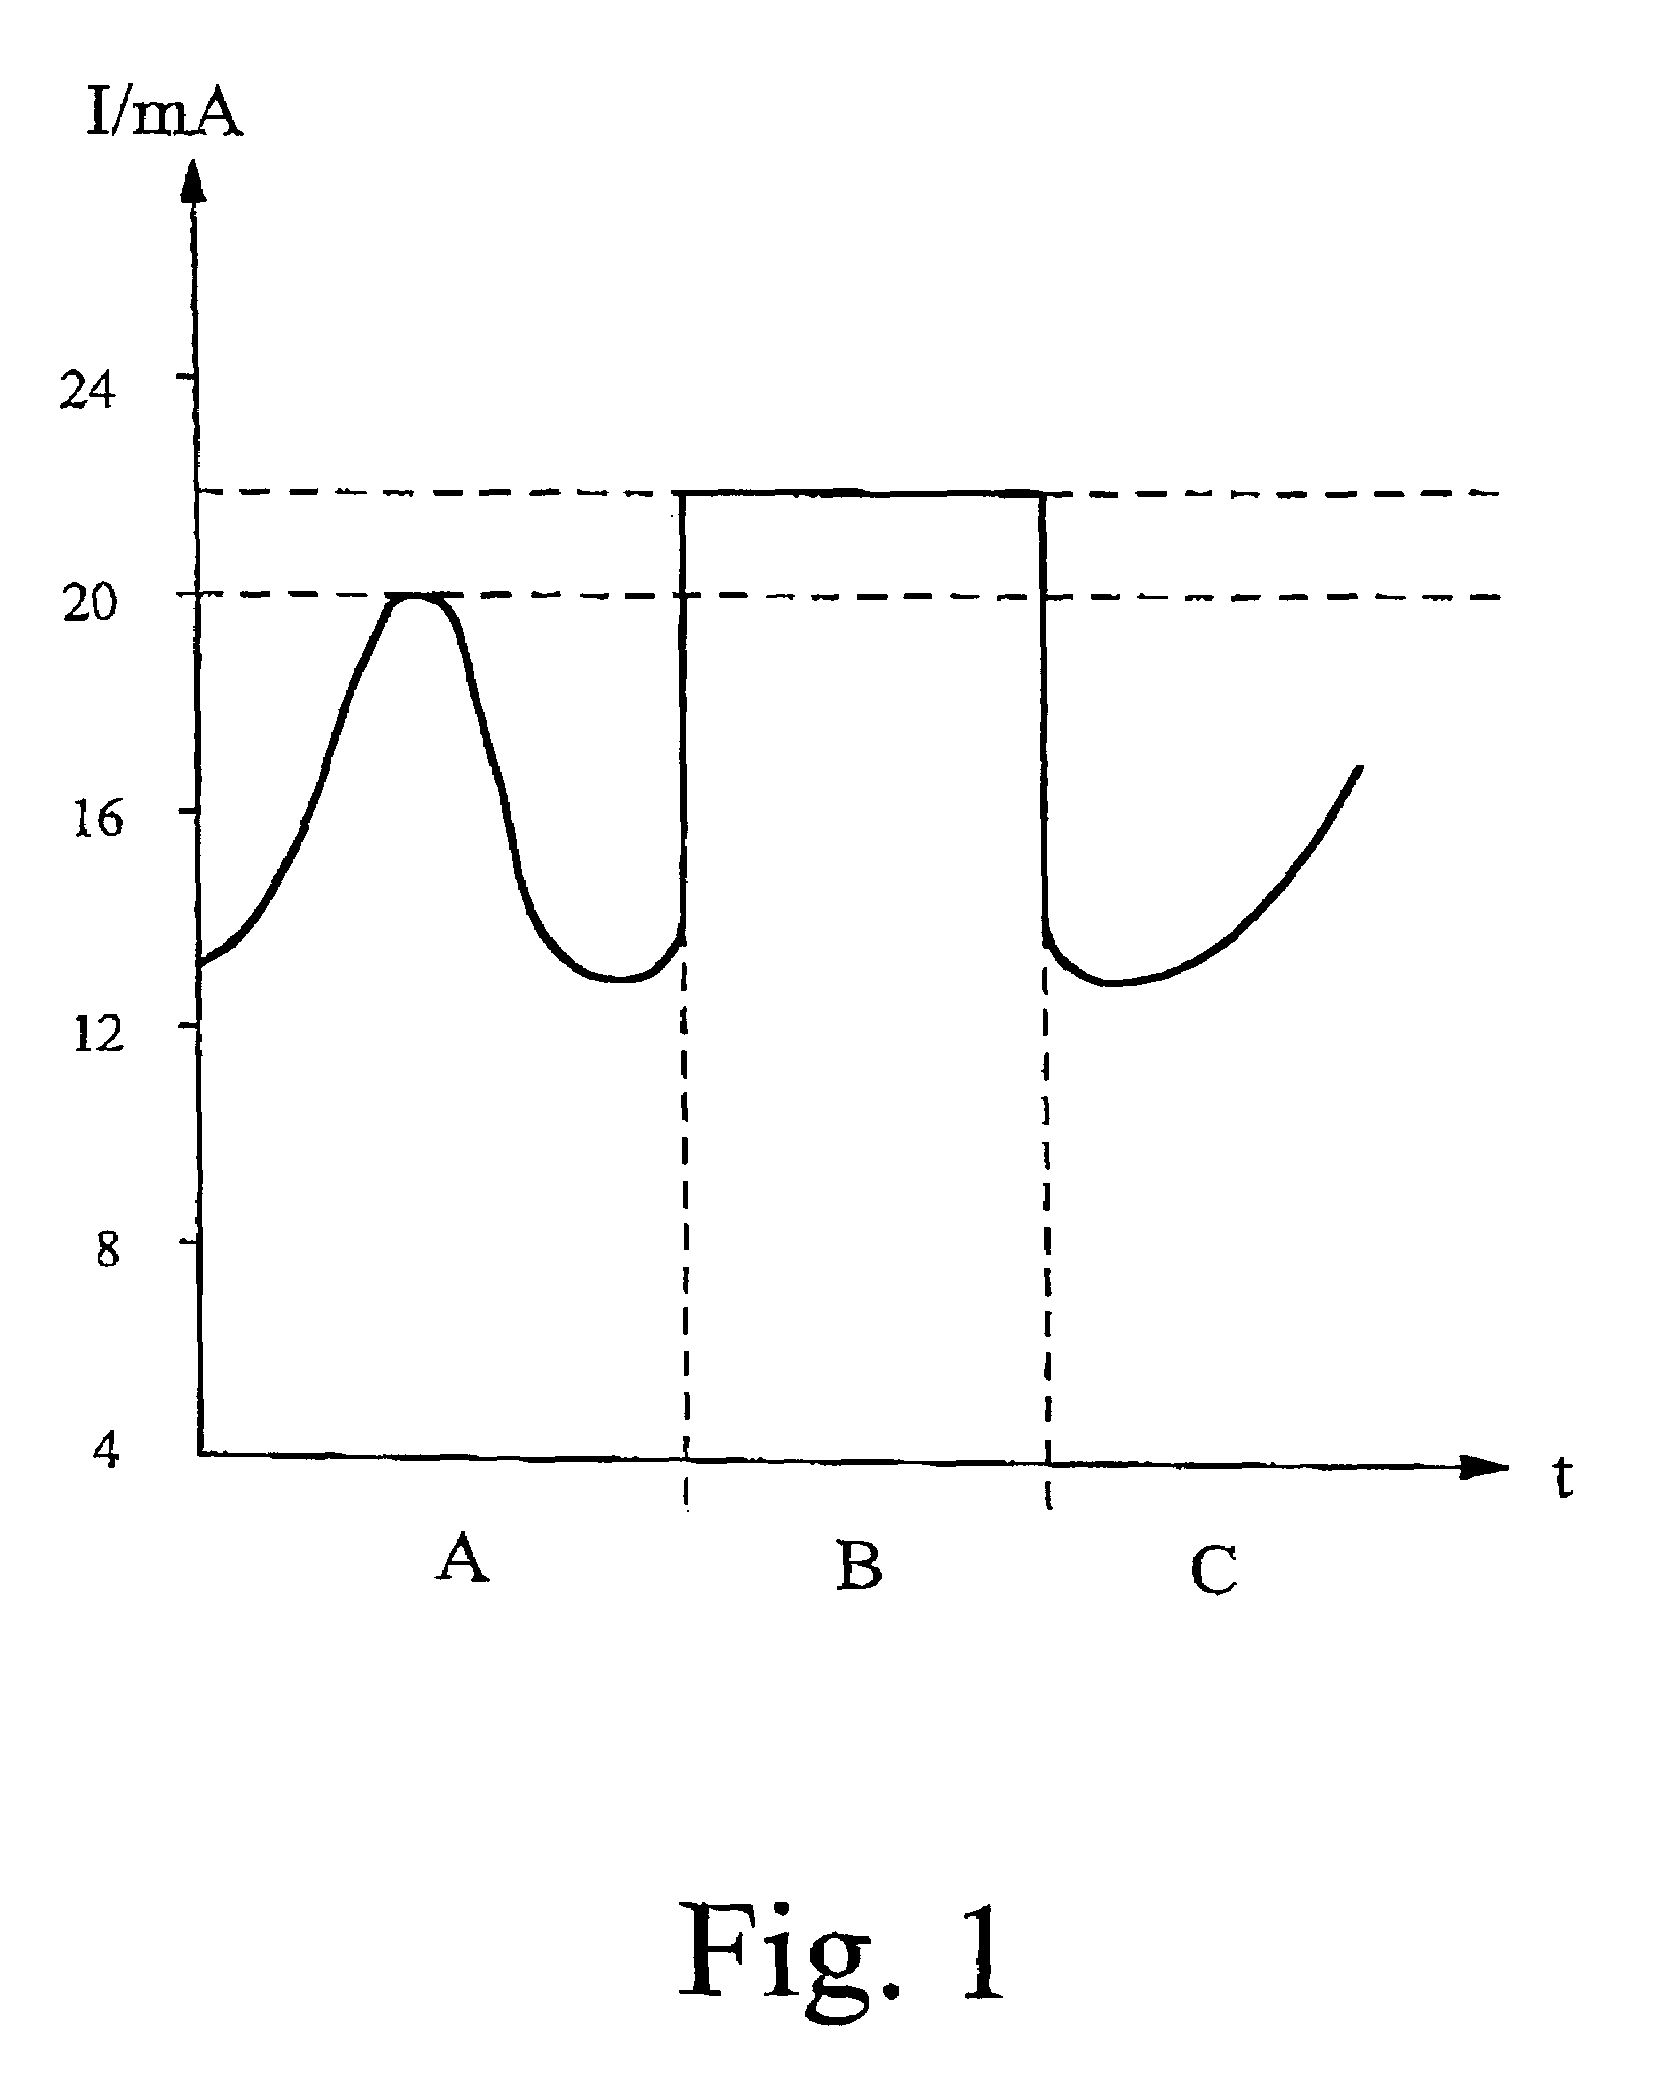 Electric device and method for operating an electric device